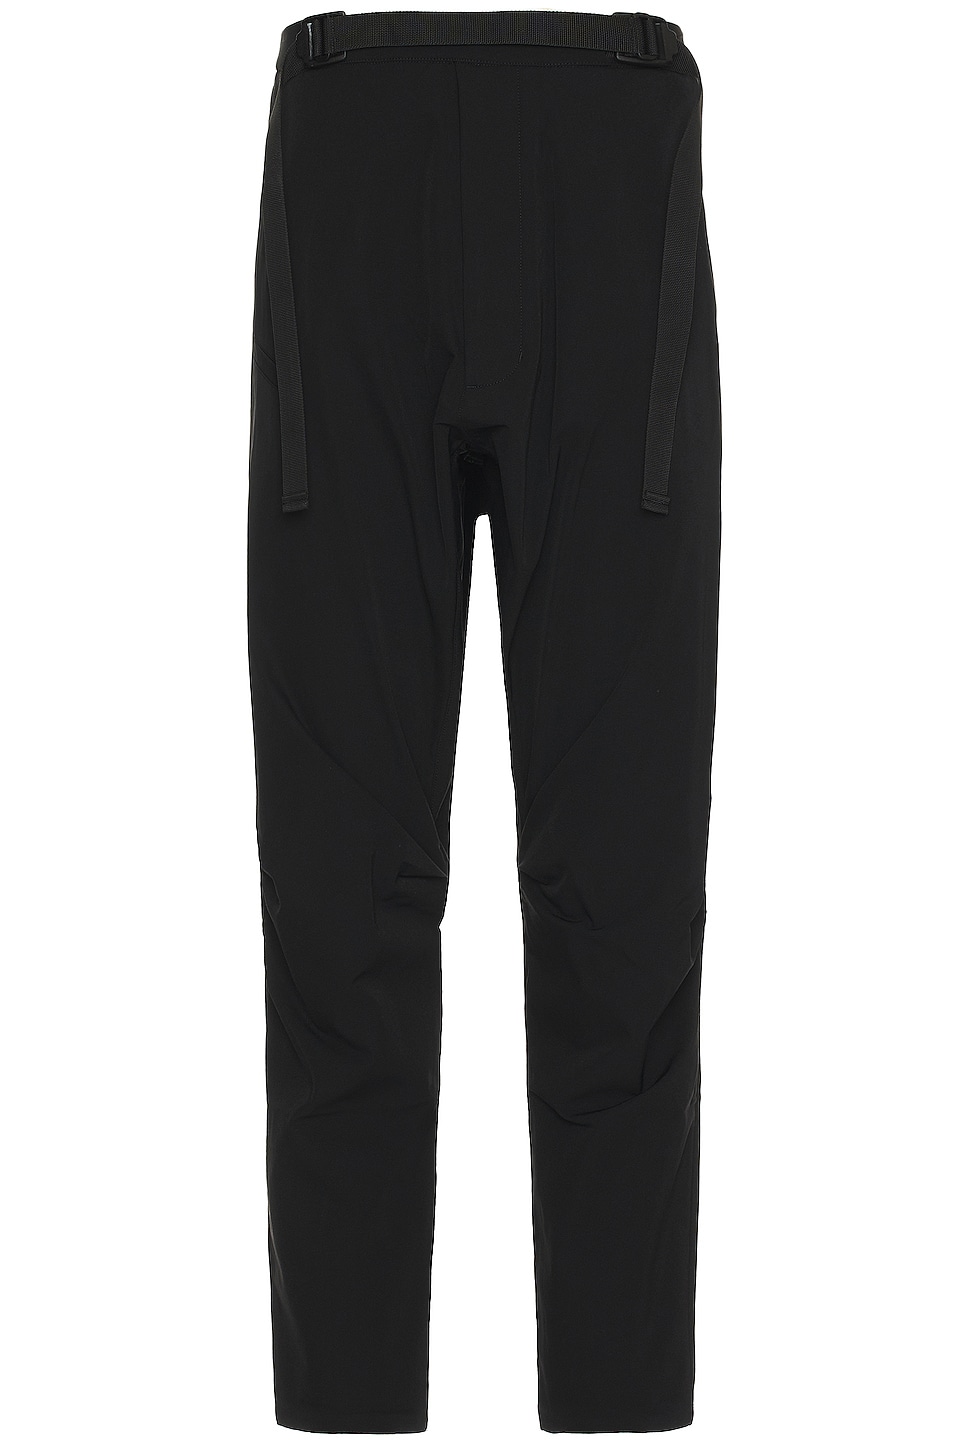 Image 1 of Acronym P15-ds Schoeller Dryskin Drawcord Trouser in Black